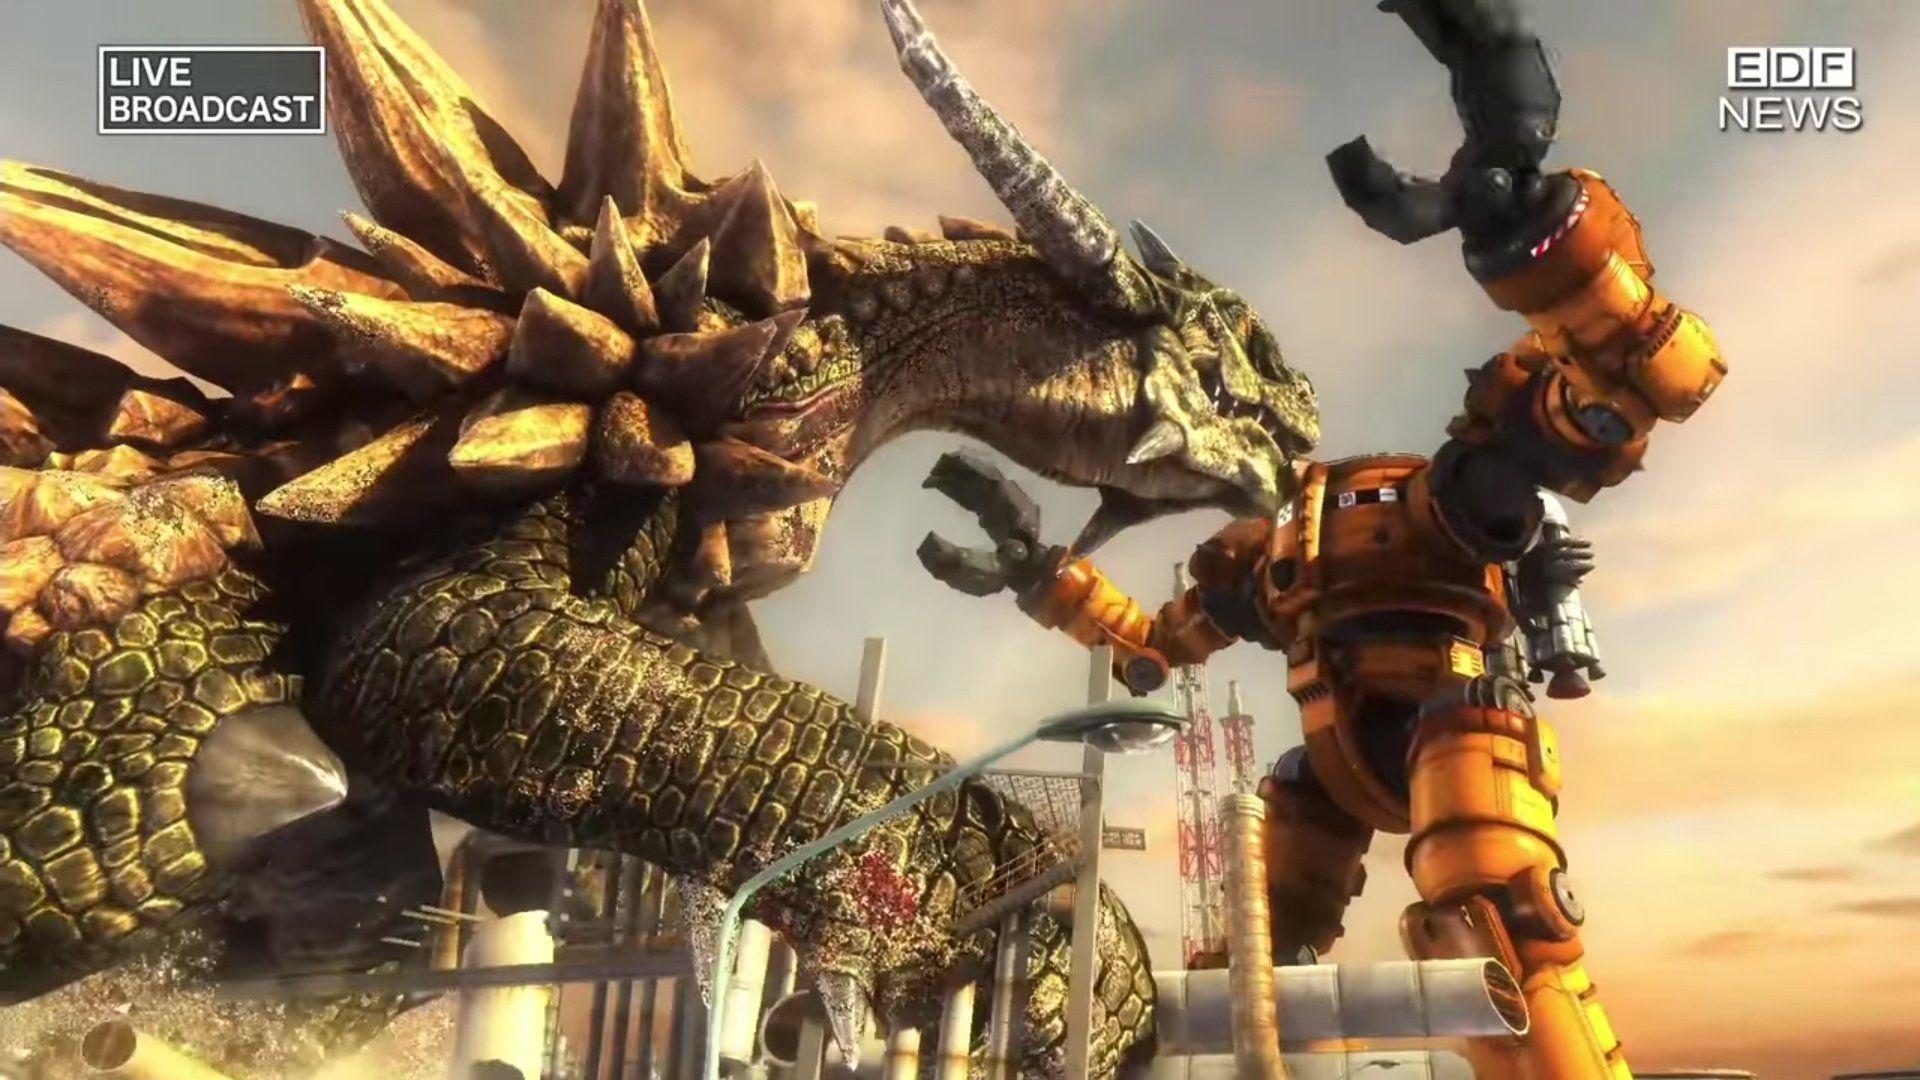 Oh yeah, I'm down for Earth Defense Force 5